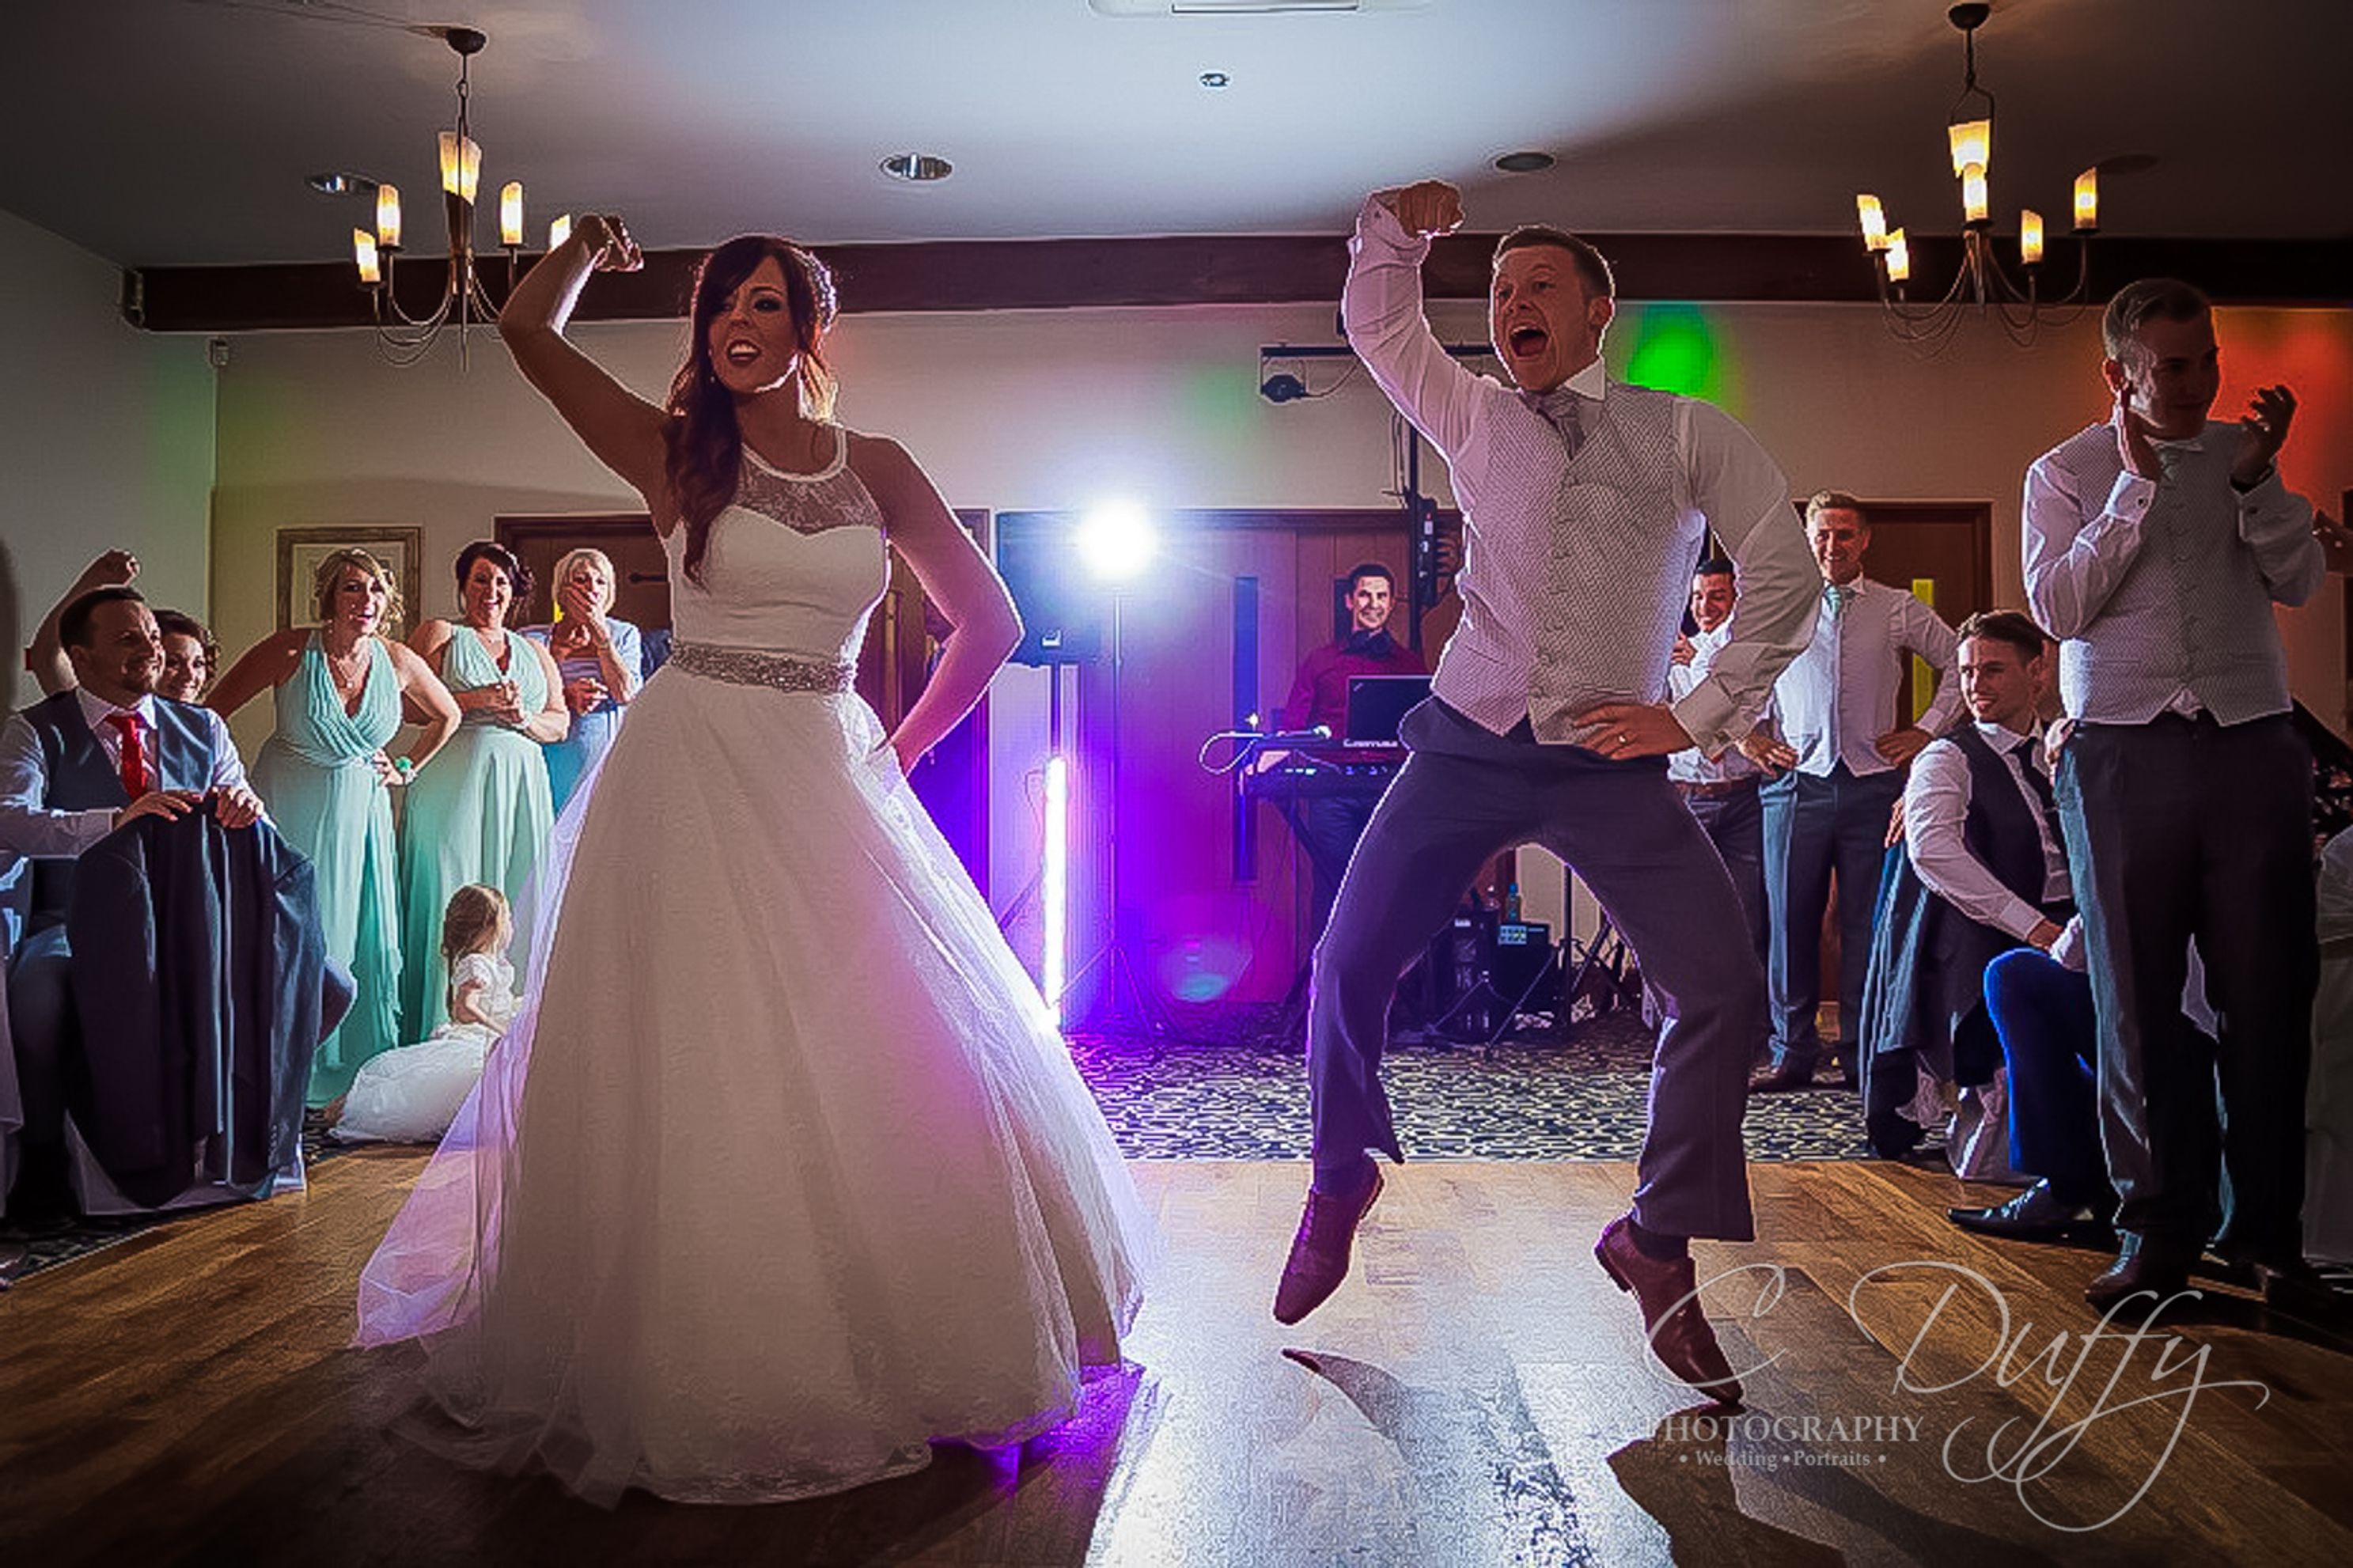 Bride and groom fun first dance captured by wedding photographer